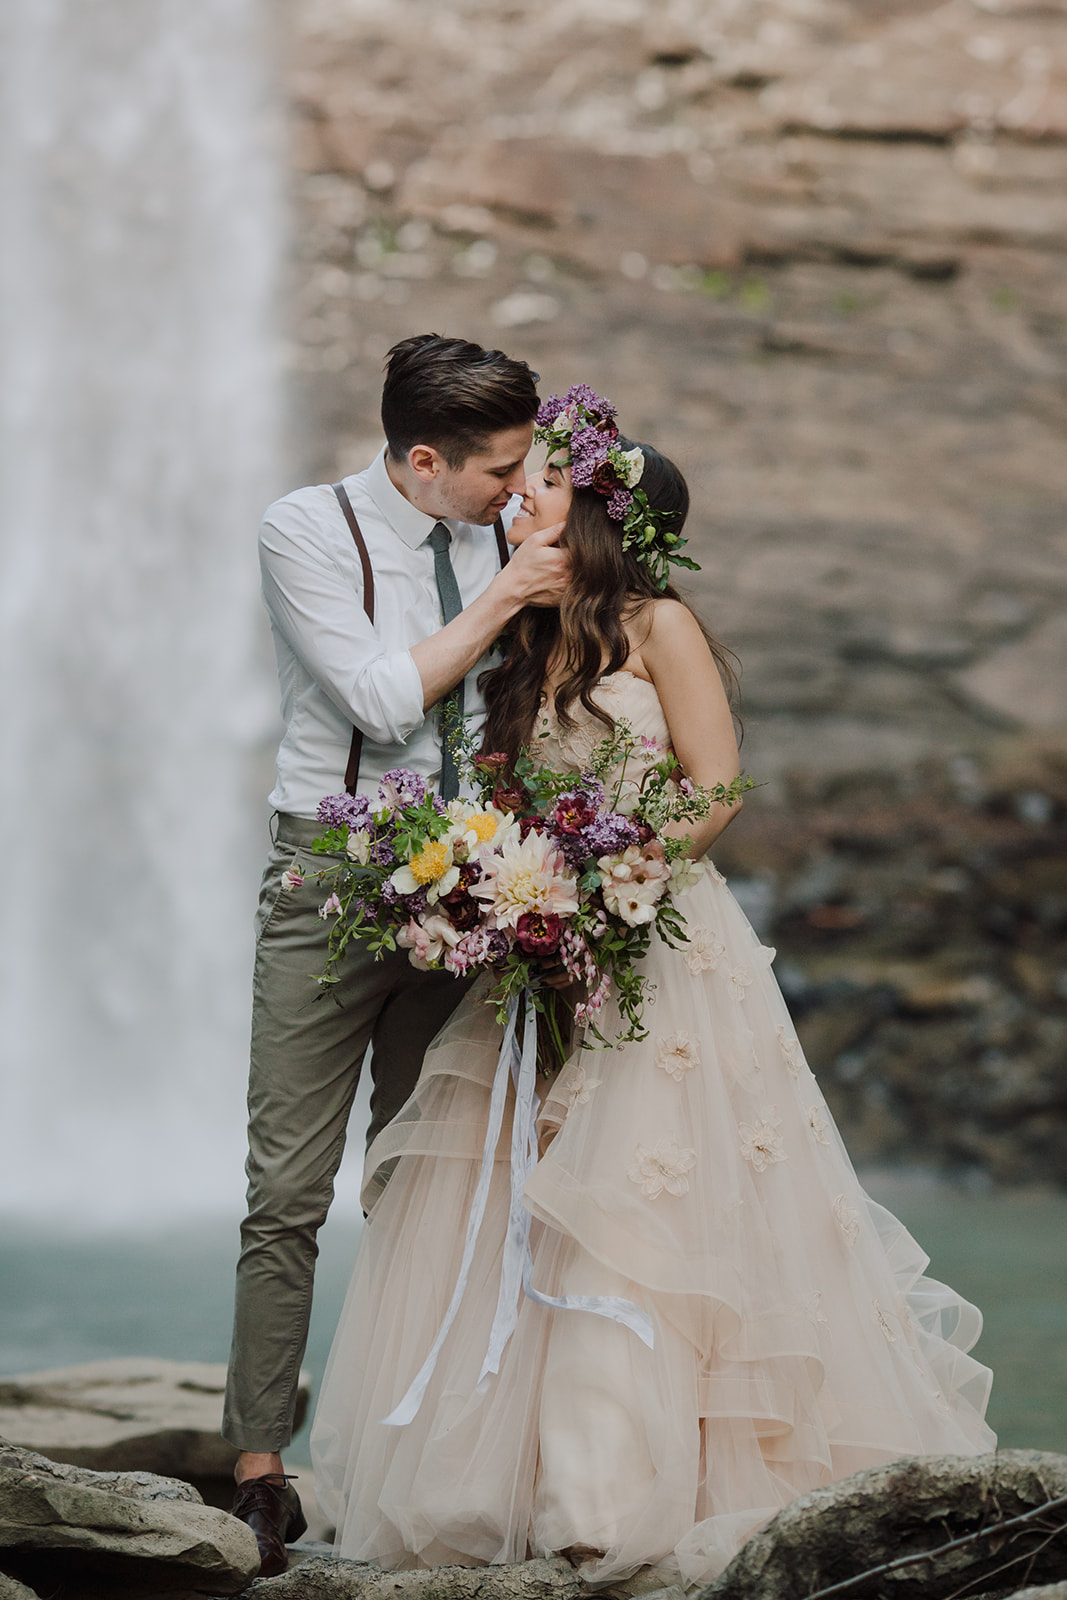 Natural, trailing bridal bouquet and flower crown with a blush wedding dress // Middle TN Waterfall Vow Renewal Floral Design